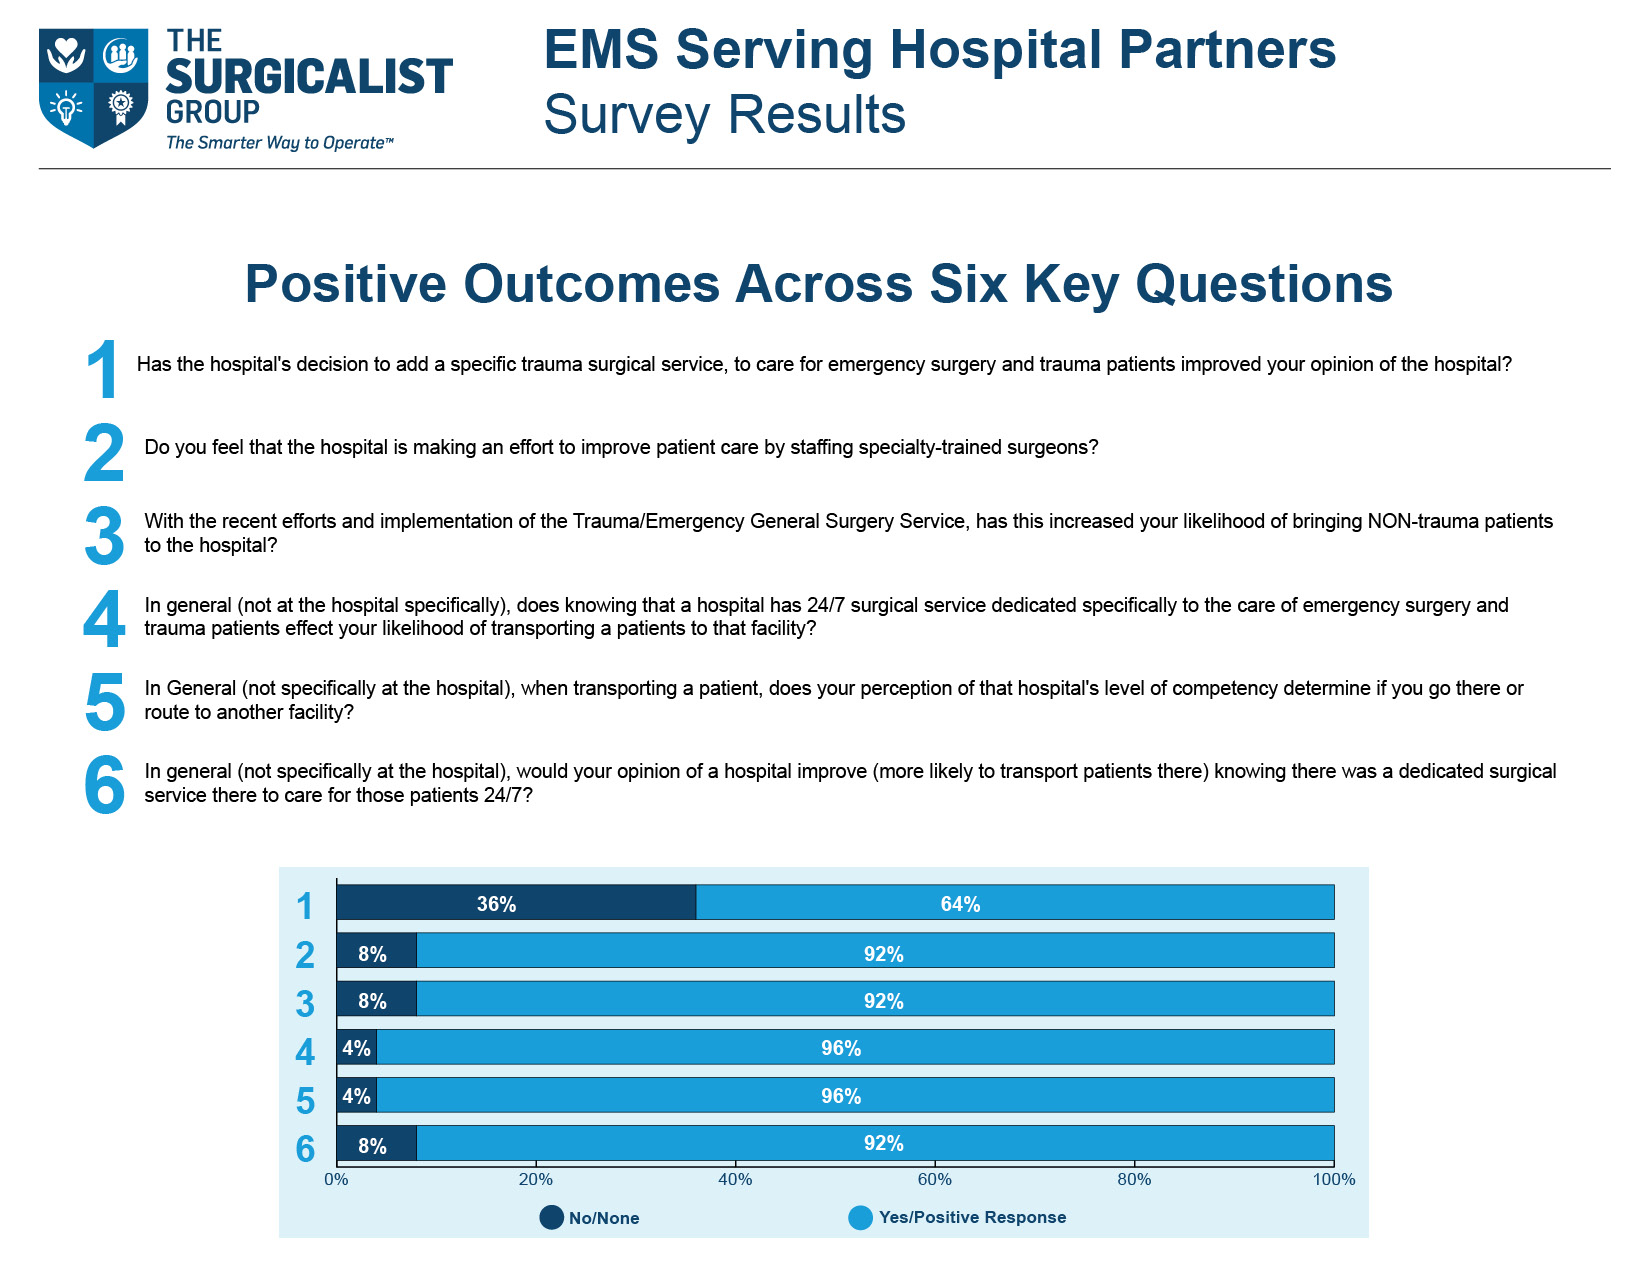 EMS Prefer Hospitals with The Surgicalist Group - The Surgicalist Group